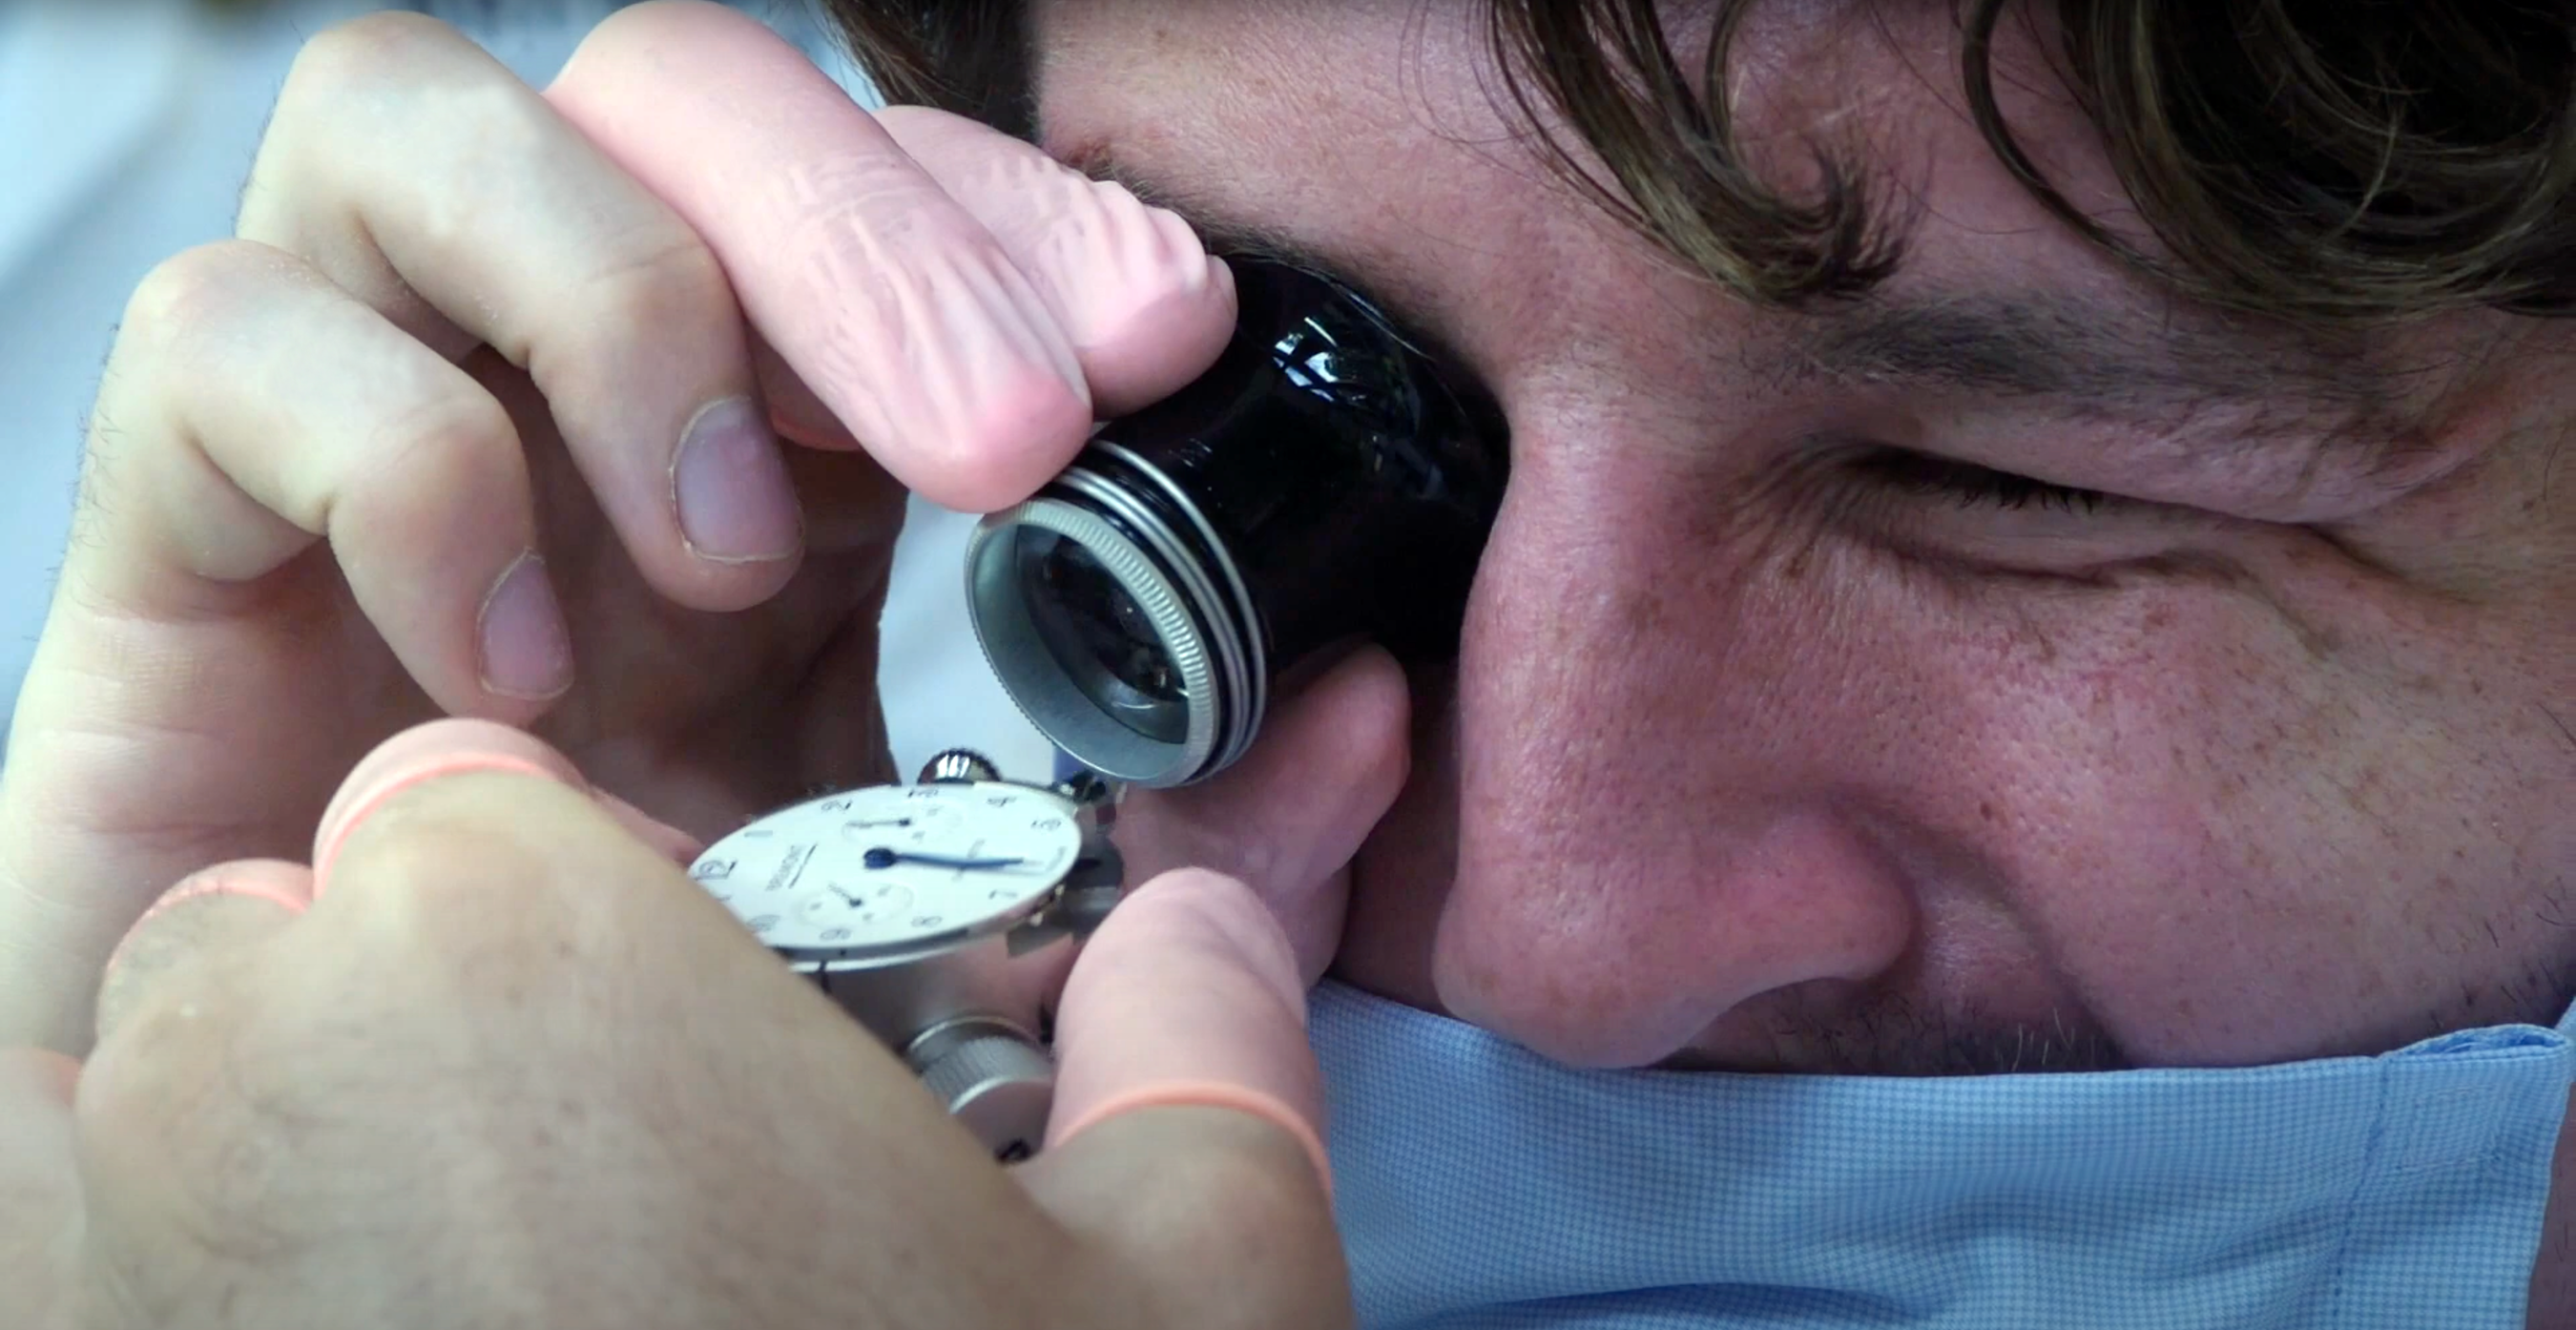 PUTTING ENGLAND RUGBY STAR TOM CURRY TO THE TEST IN THE BREMONT WORKSHOP